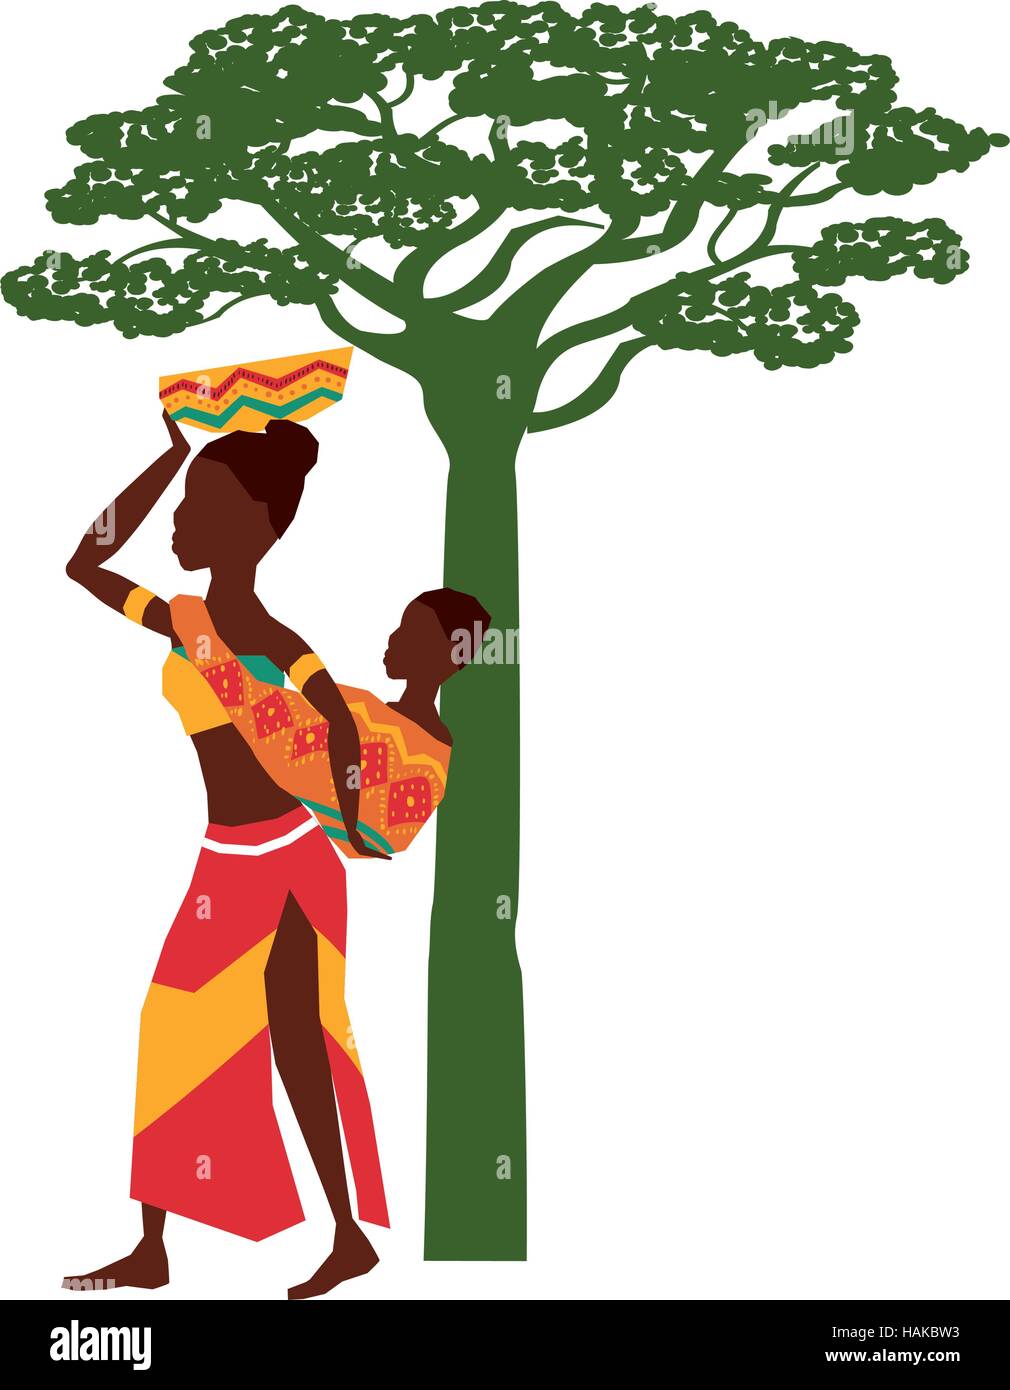 African woman baby icon vector illustration graphic design Stock Vector